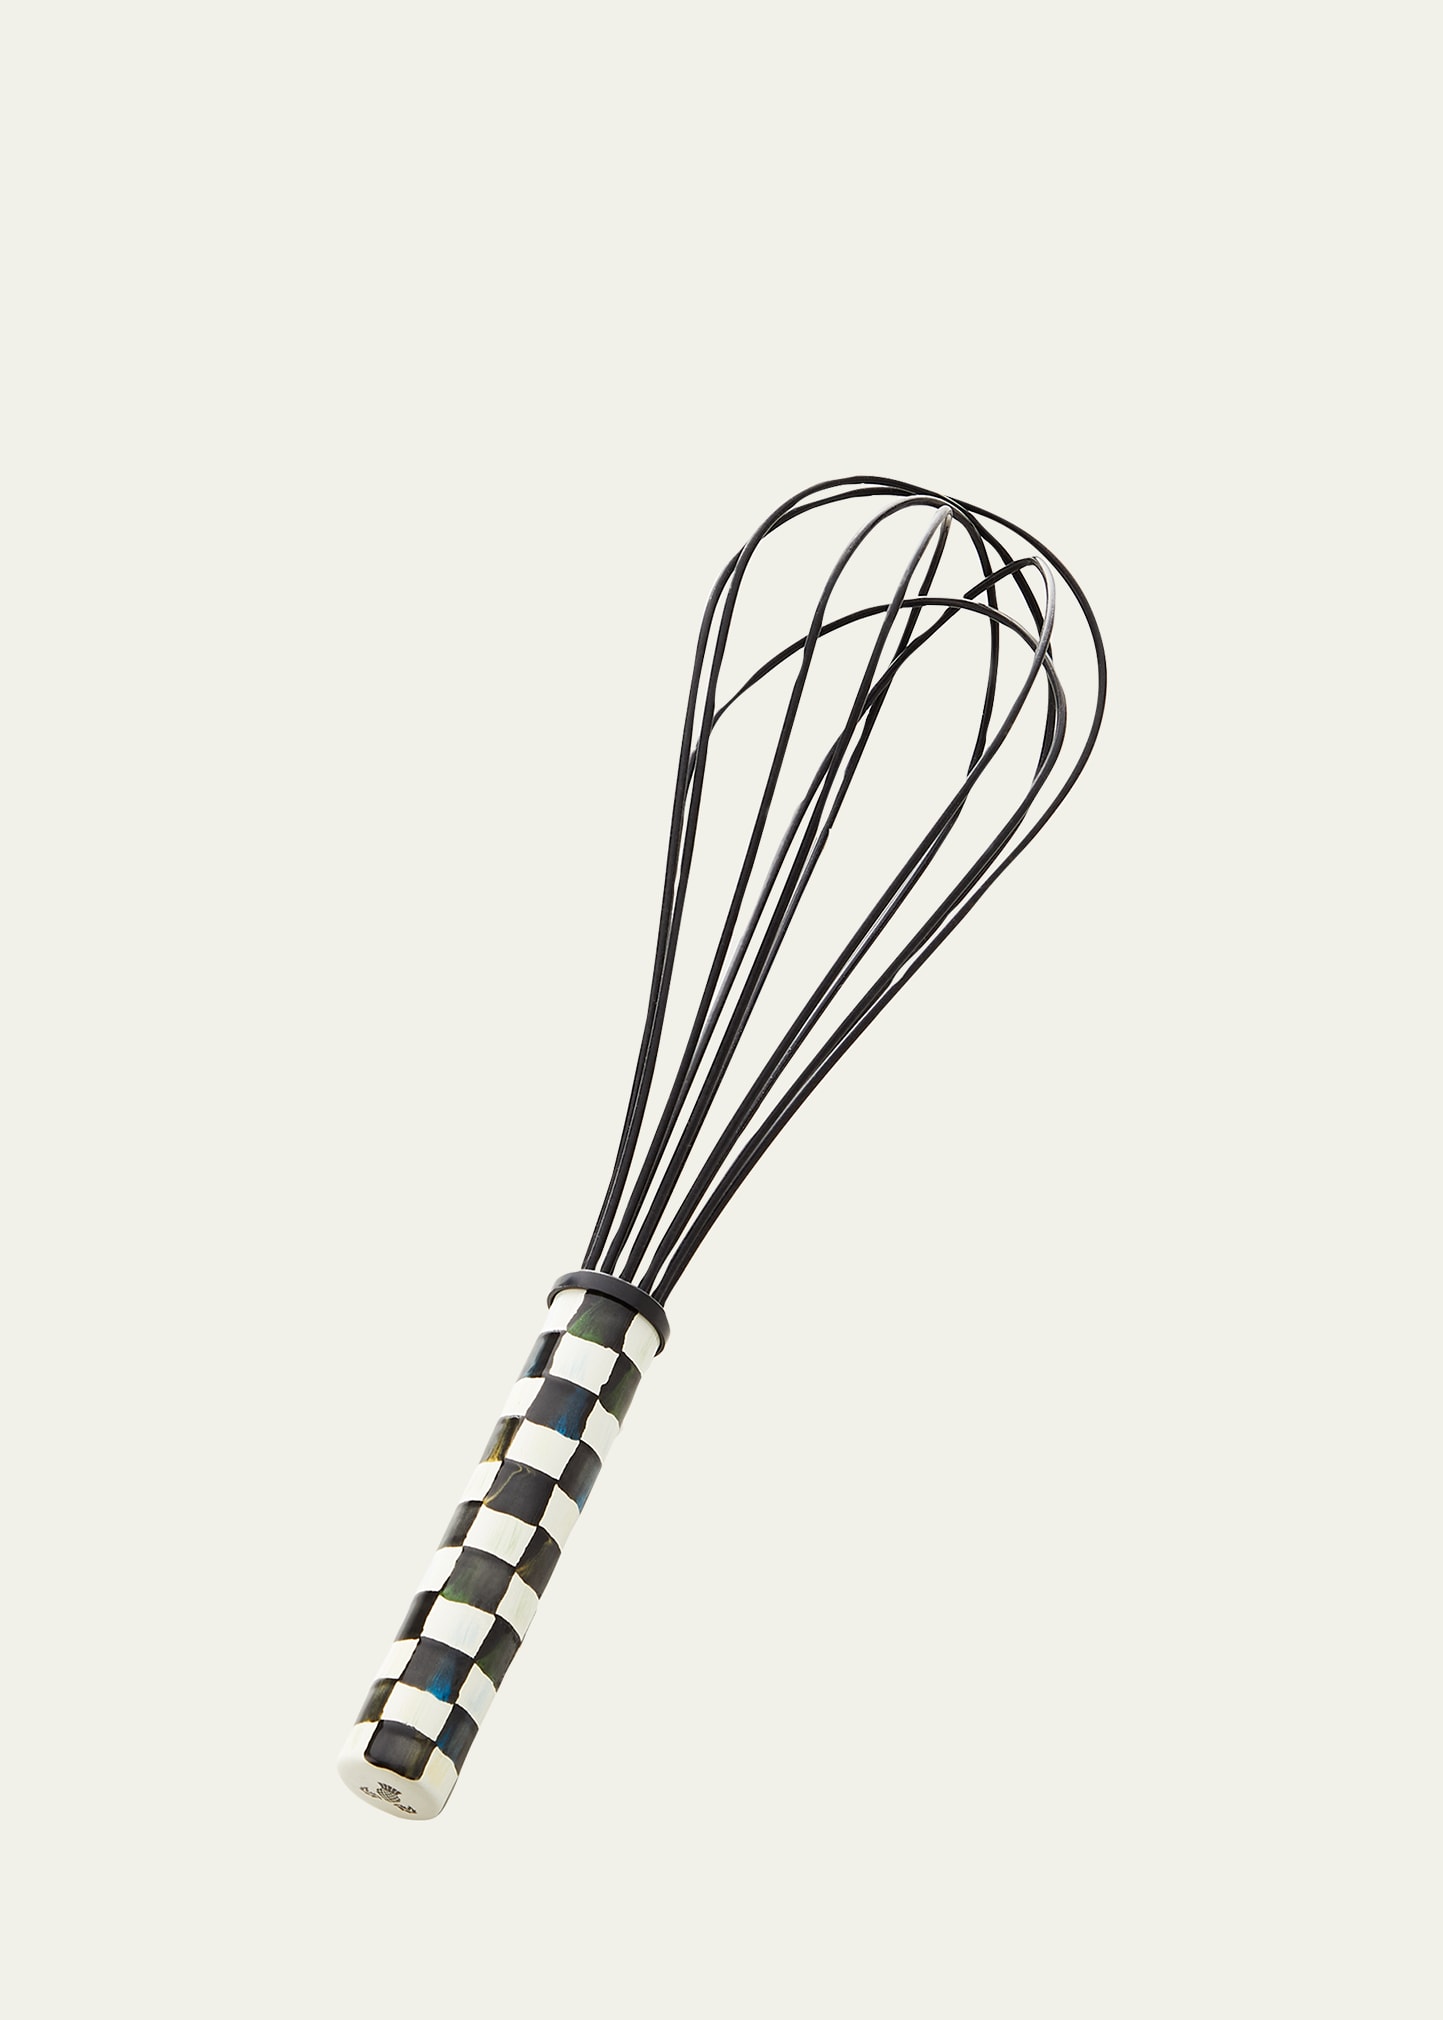 Shop Mackenzie-childs Courtly Check Large Whisk